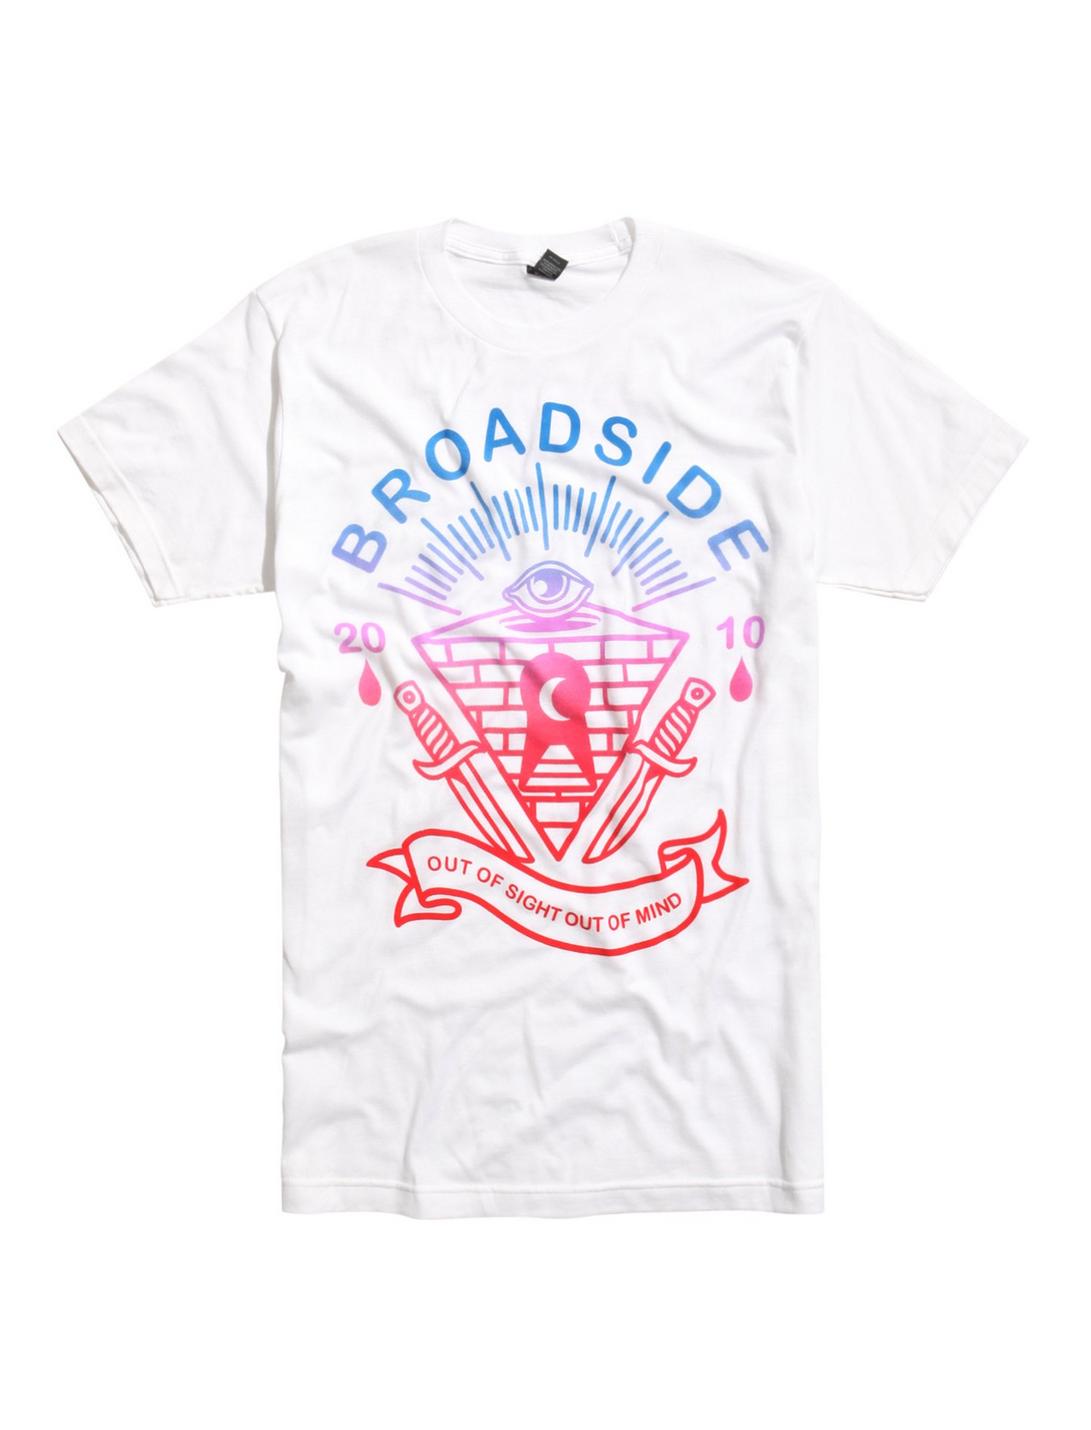 Broadside Out Of Sight T-Shirt, WHITE, hi-res